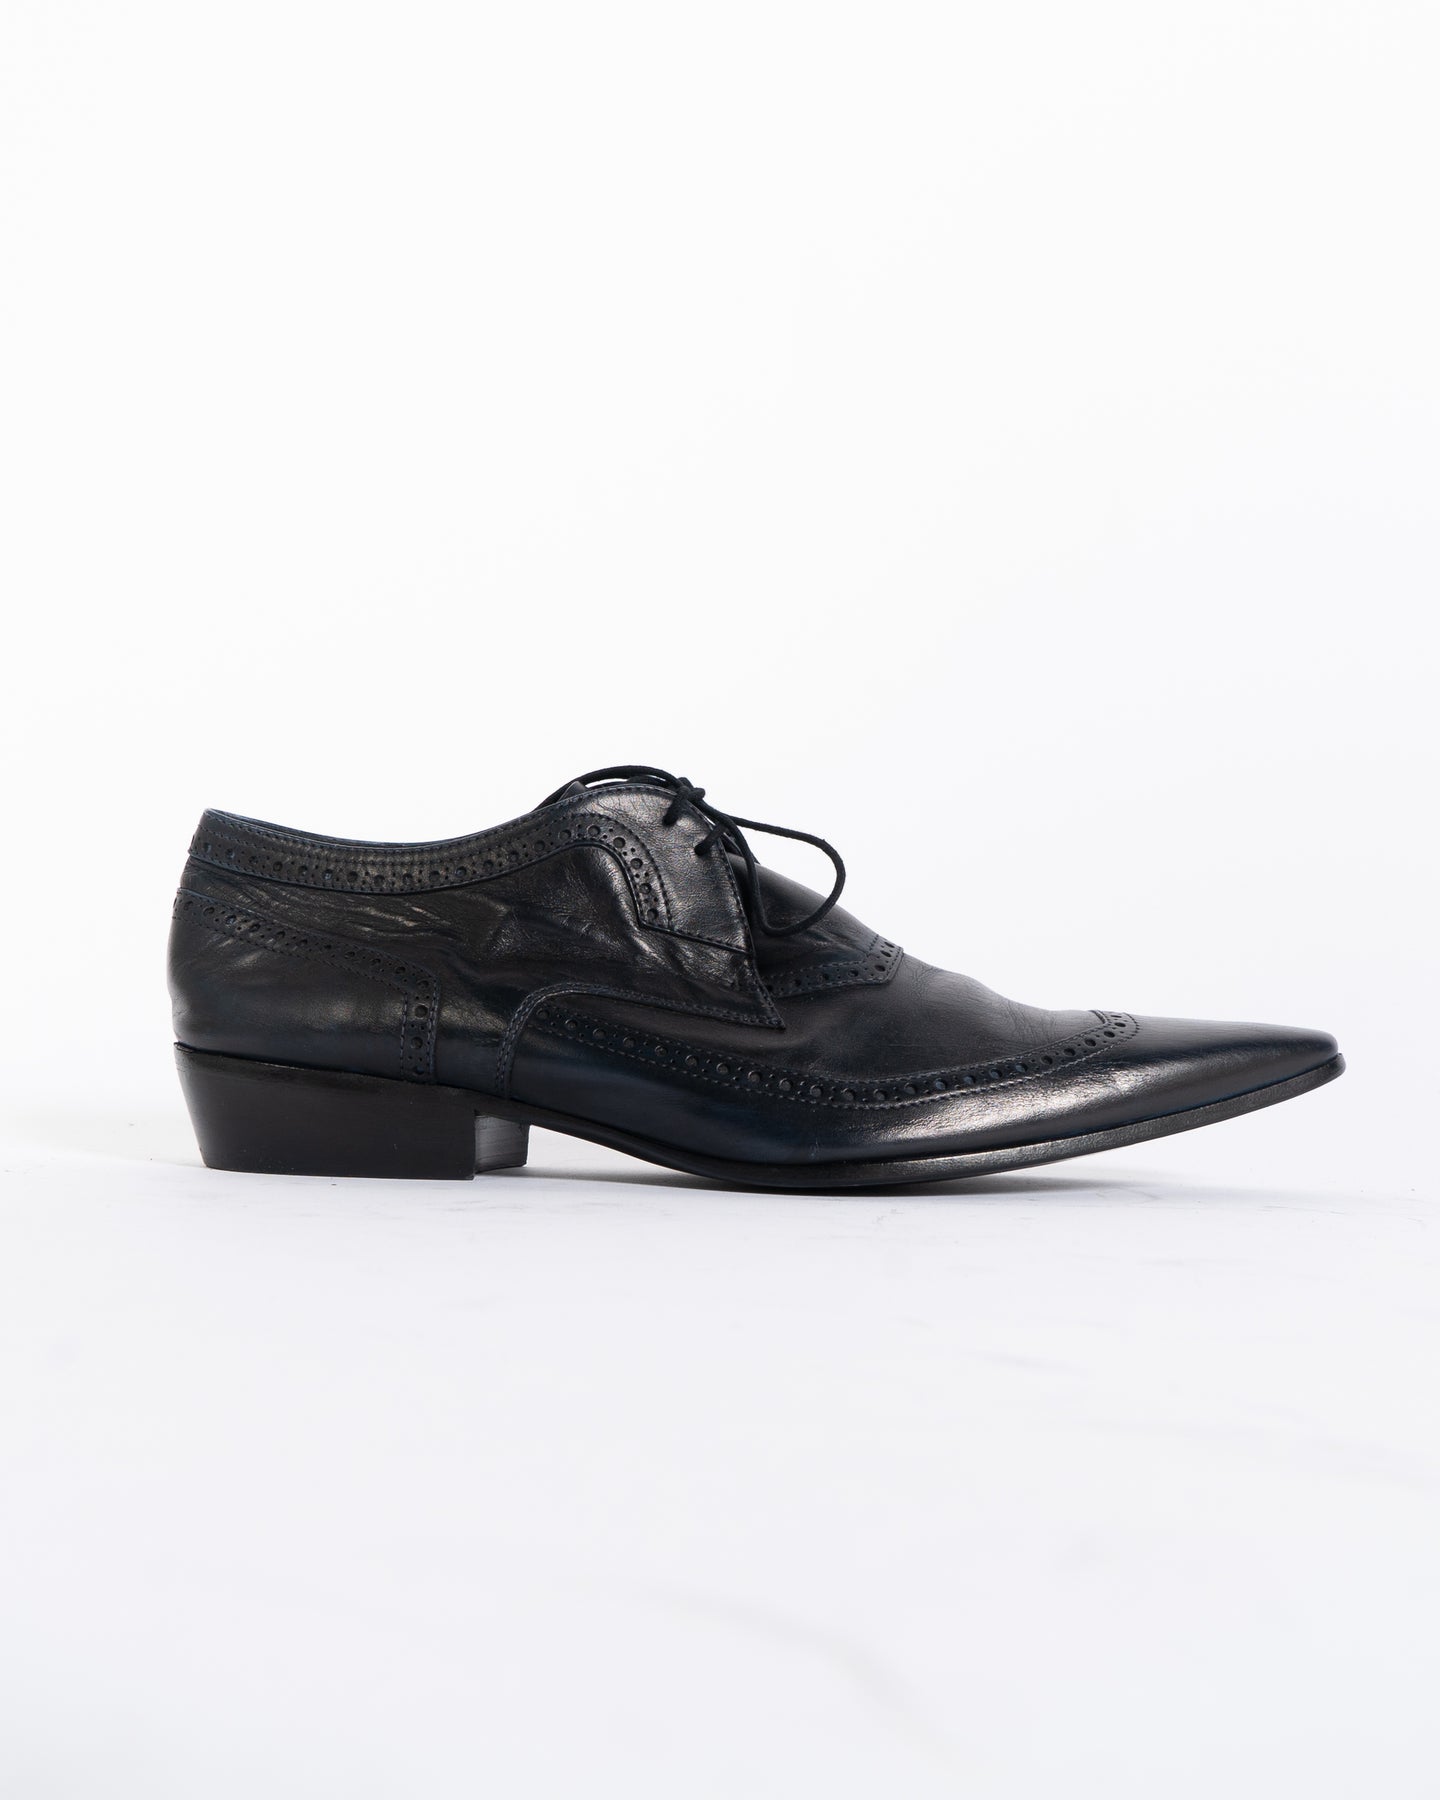 SS17 Black Leather Pointed Brogue Derbies